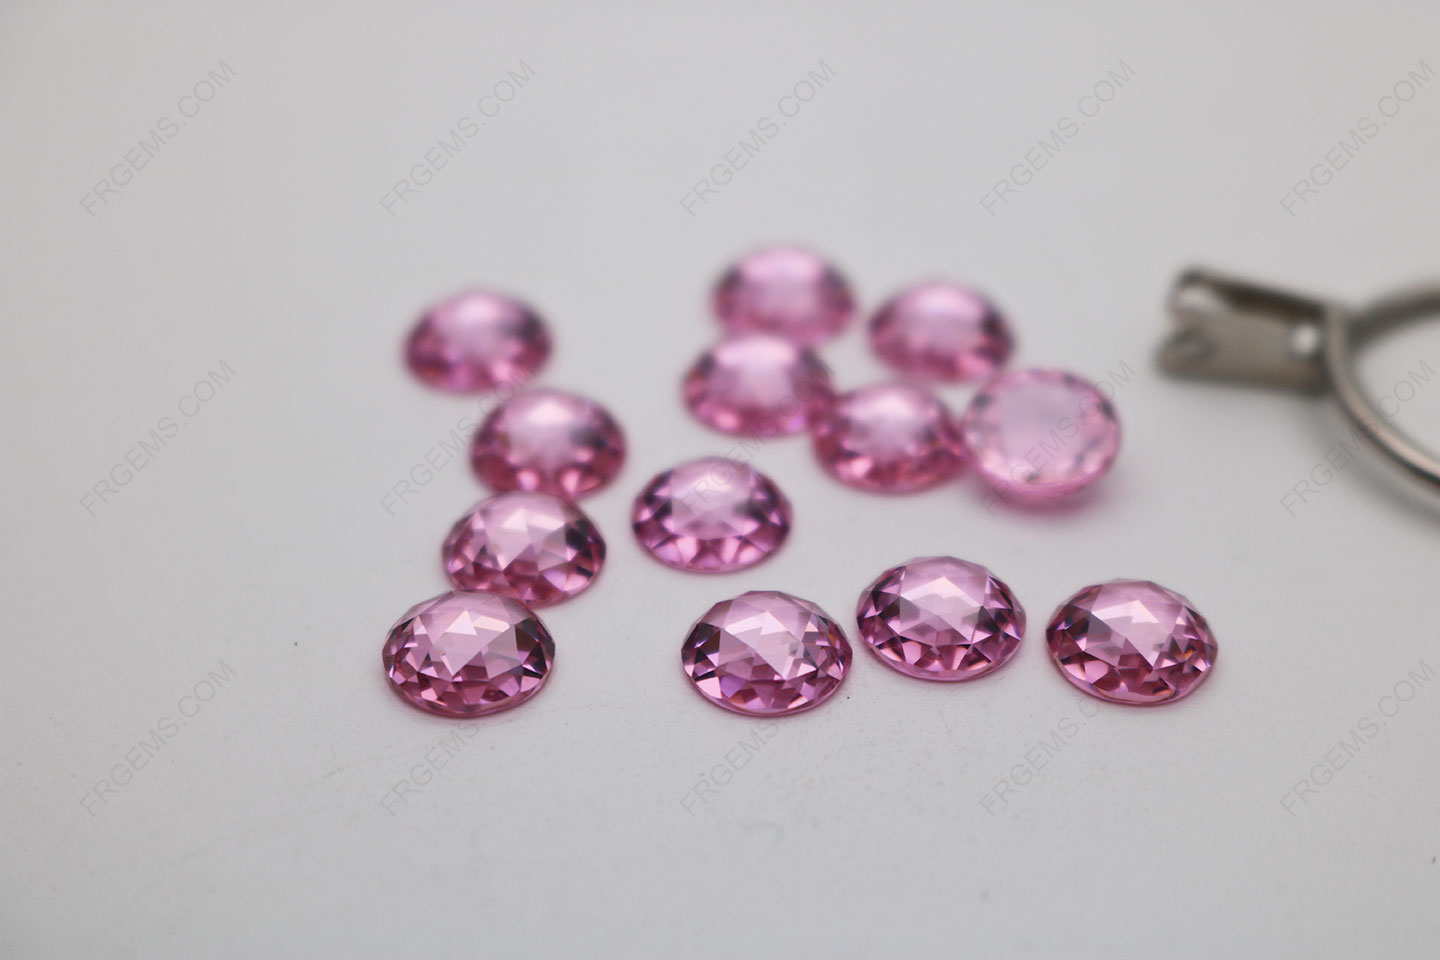 Cubic Zirconia Pink Round Shape Rose Cut Flat Bottom 8mm stones China Suppliers CZ03 IMG_2066